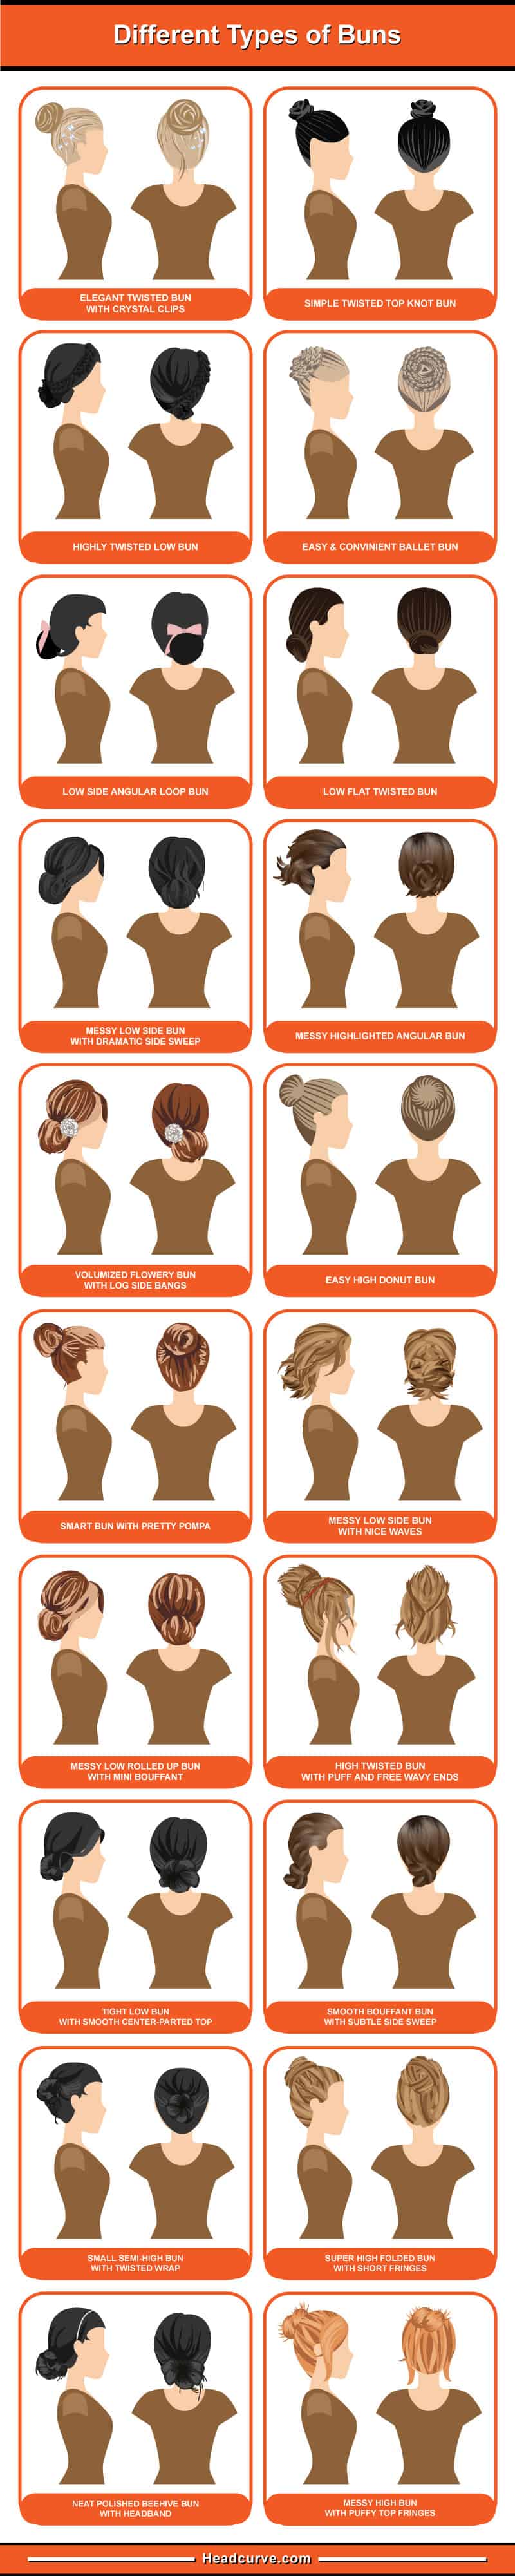 Chart setting out the different types of hair buns for women